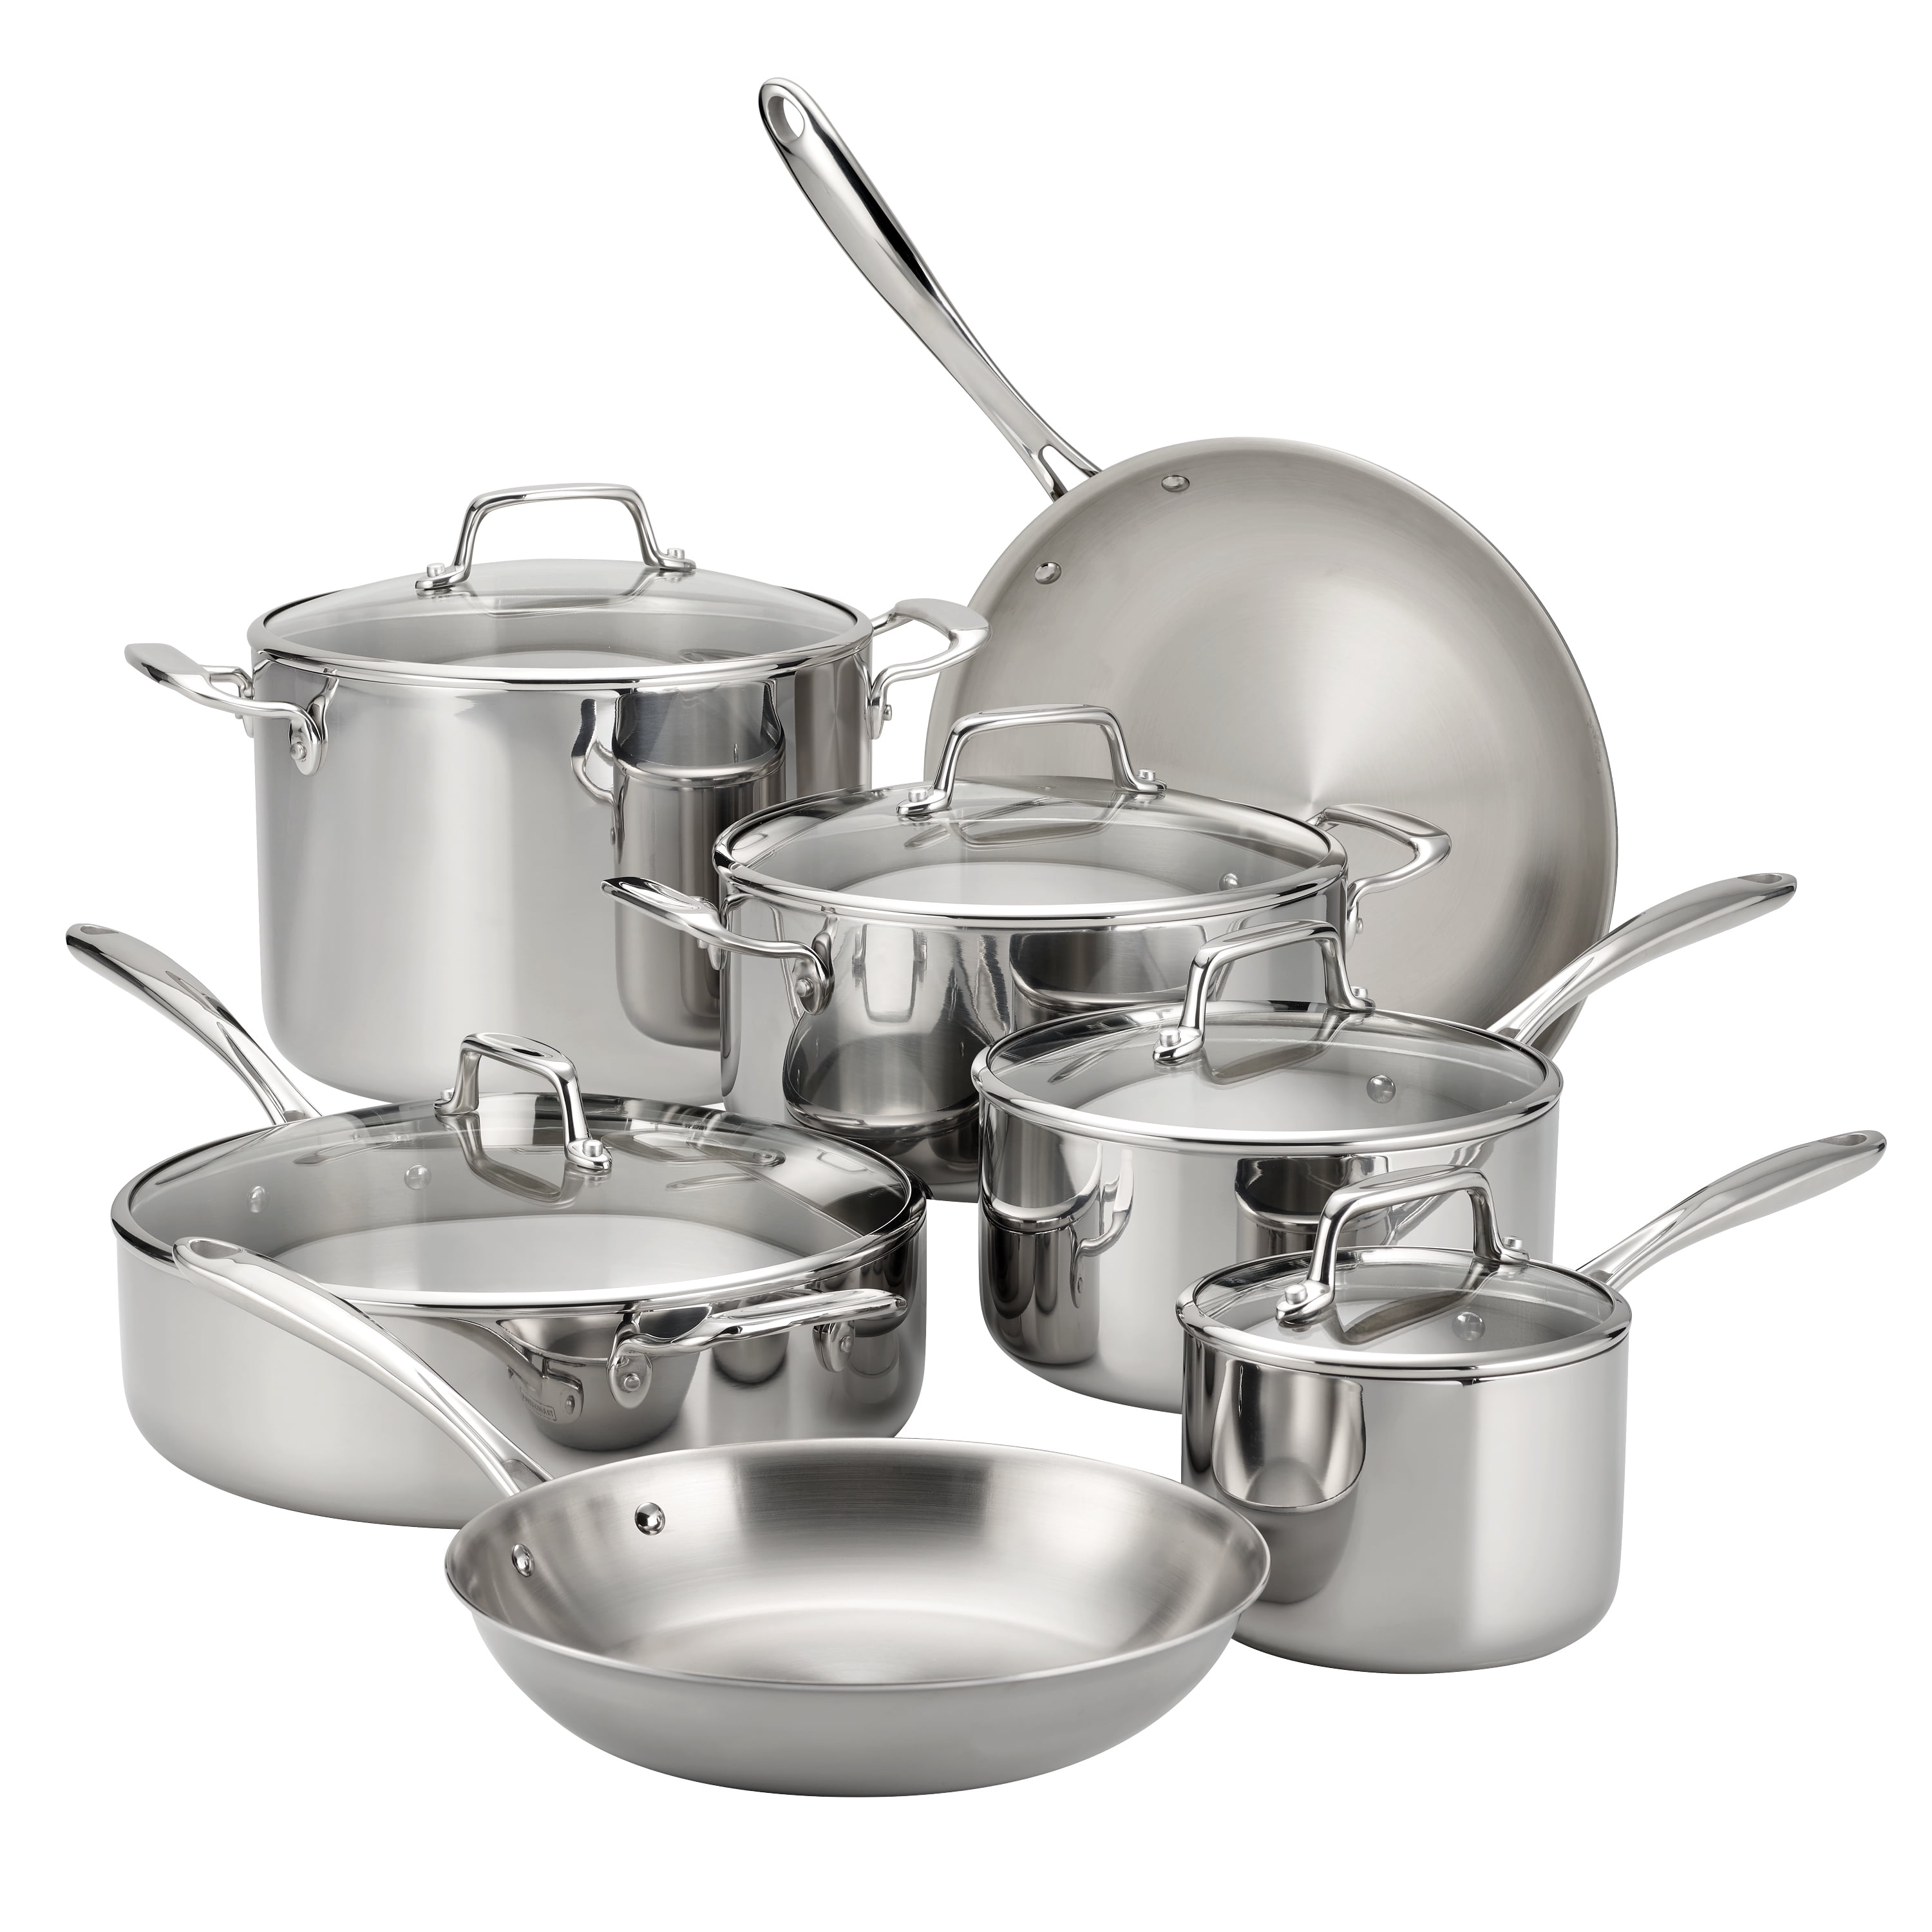 12 Pieces Gourmet TriPly Clad Cookware Set Cooking Pots And Pans Stainless Steel 